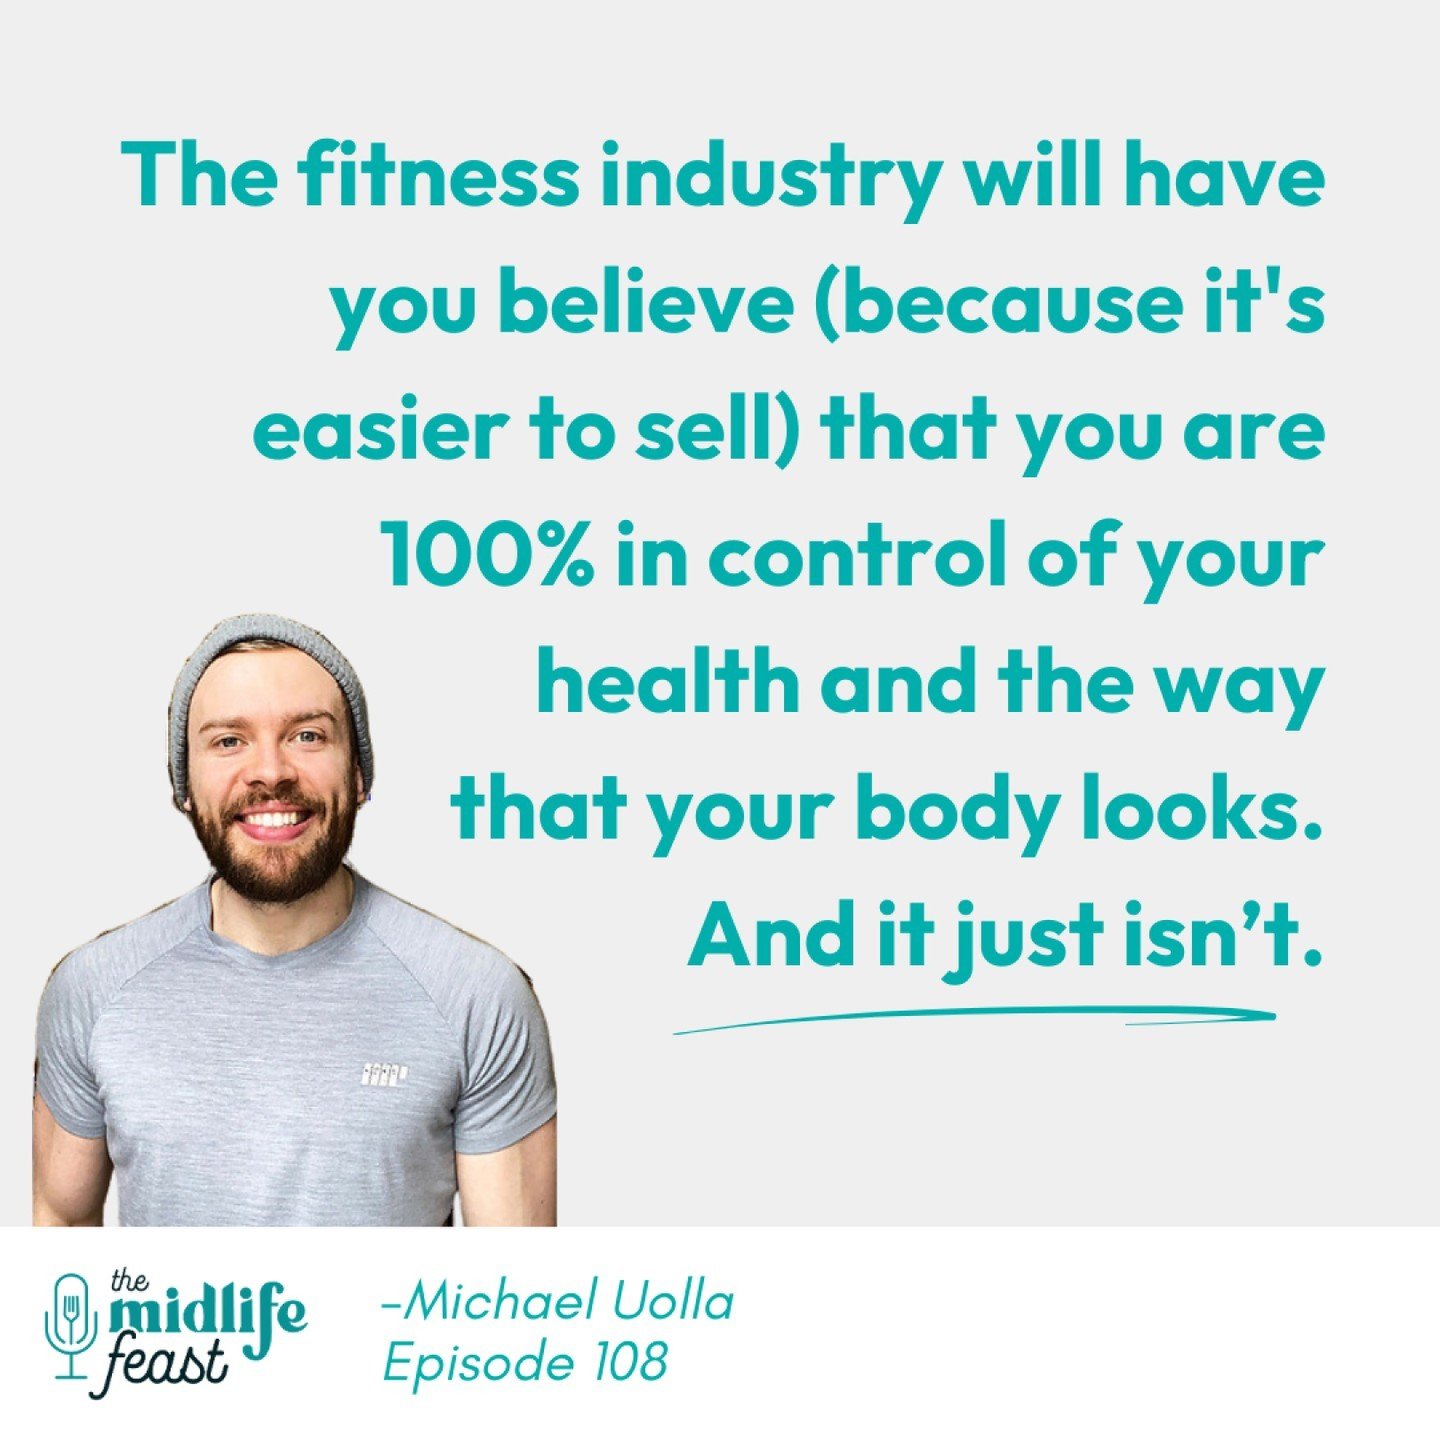 💥💥💥

It's also very easy to believe (thanks to diet and fitspo marketing) that we're the problem if the numbers on the scale aren't moving.

But if you listen closely, you'll find that the industry never talks about the role of genetics, access to